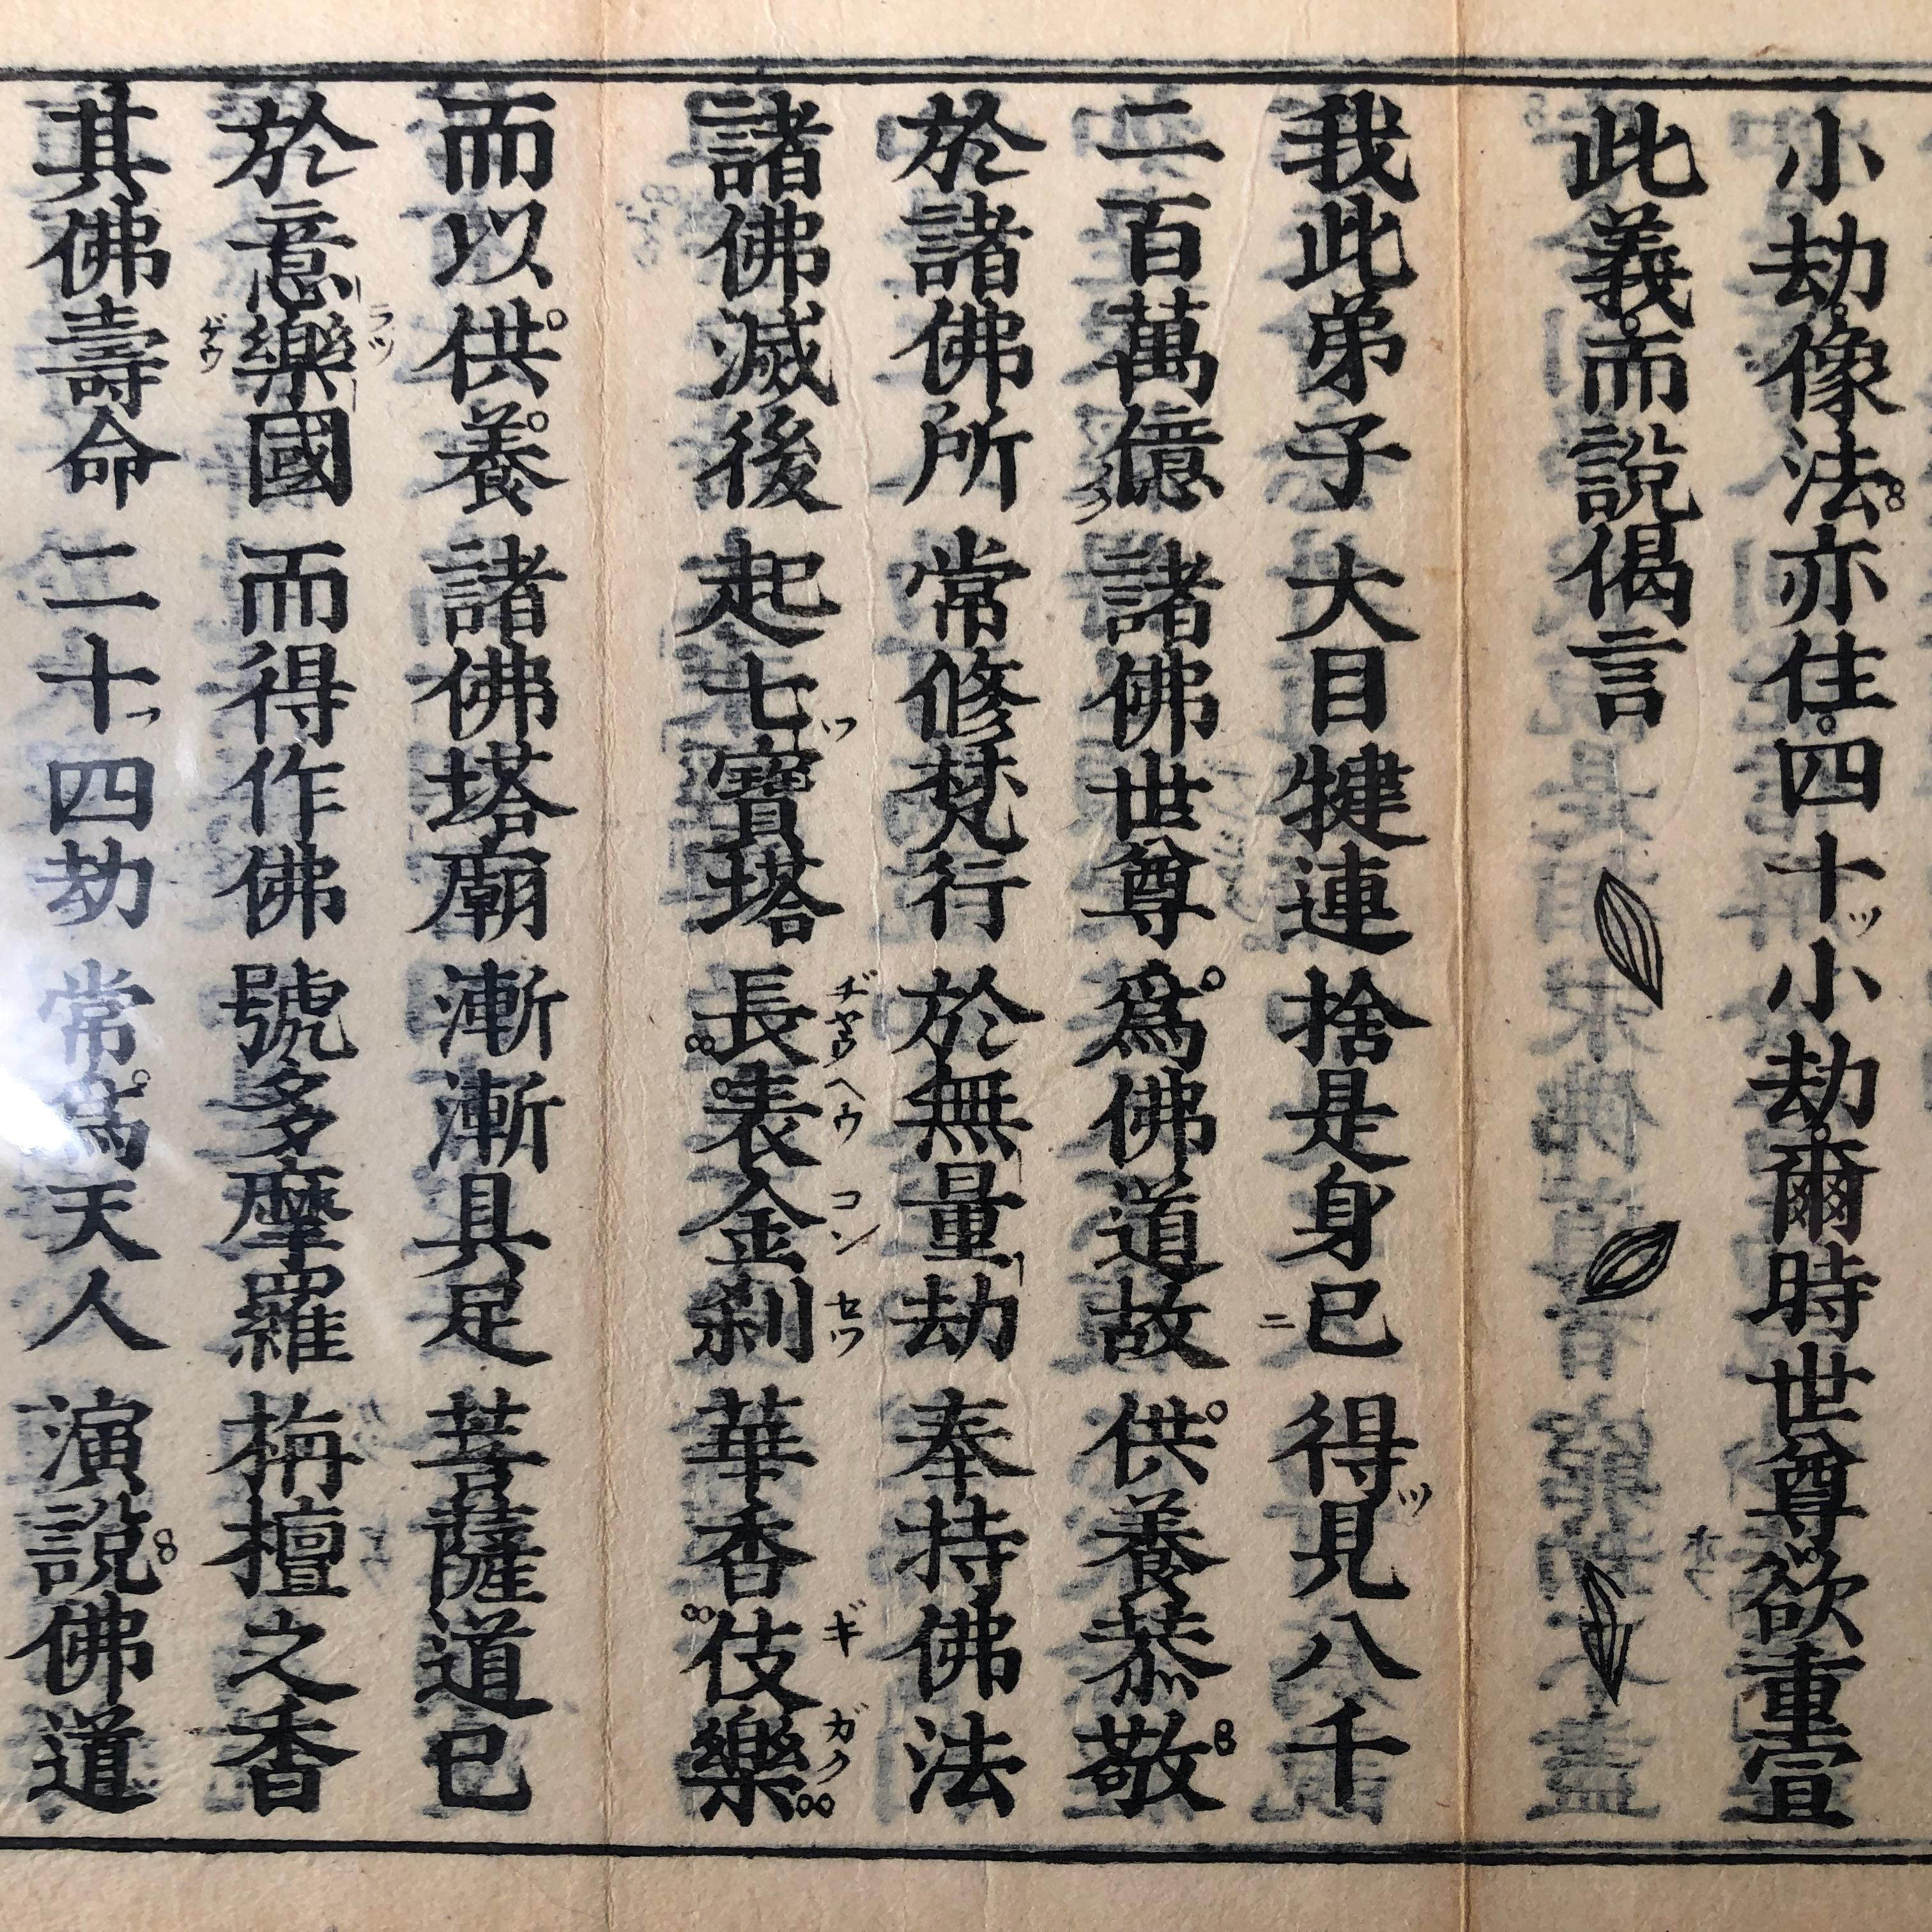 Japanese Four Antique Buddhist SACRED SUTRAS Woodblock Prints 1878, Frameable #1 2